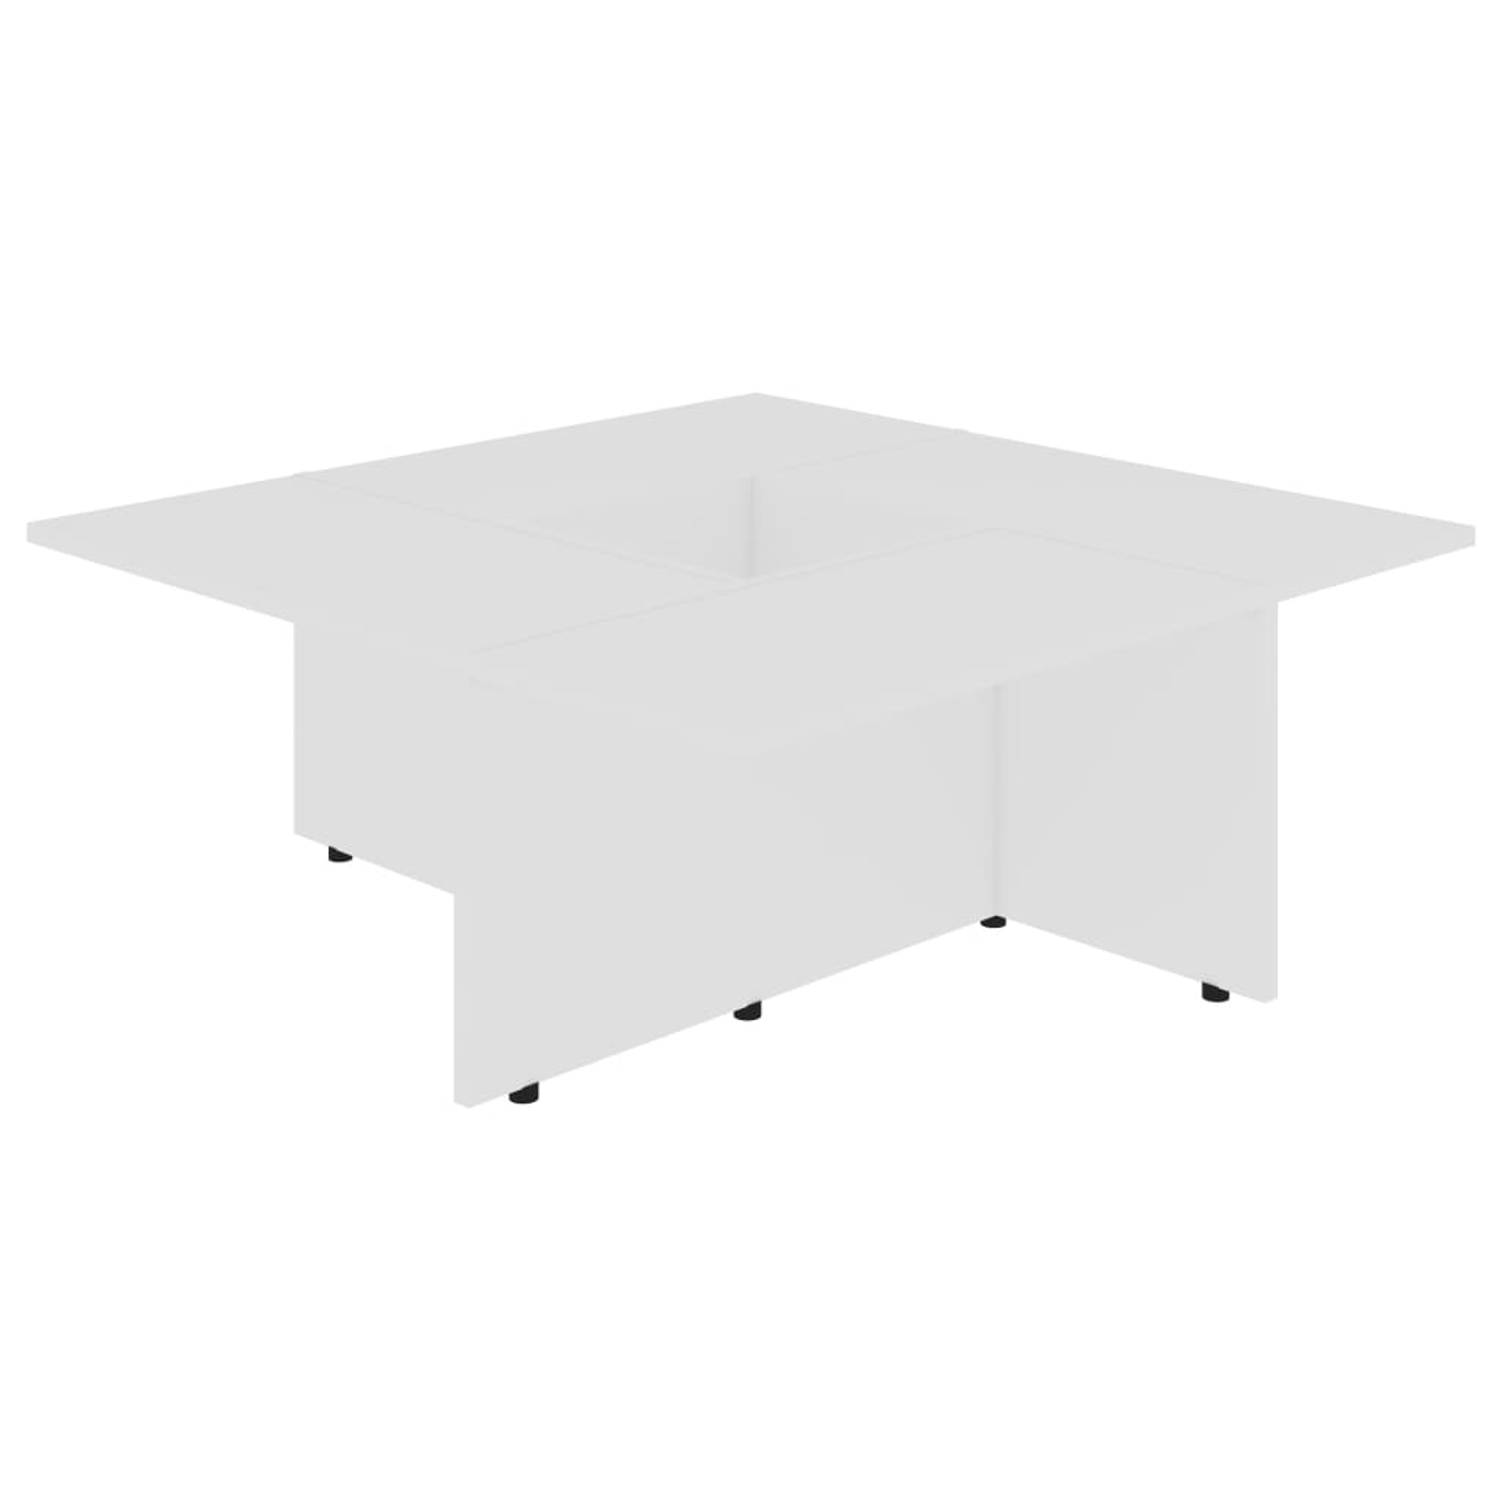 The Living Store Salontafel Modern - Hout - 79.5 x 79.5 x 30 cm - Wit